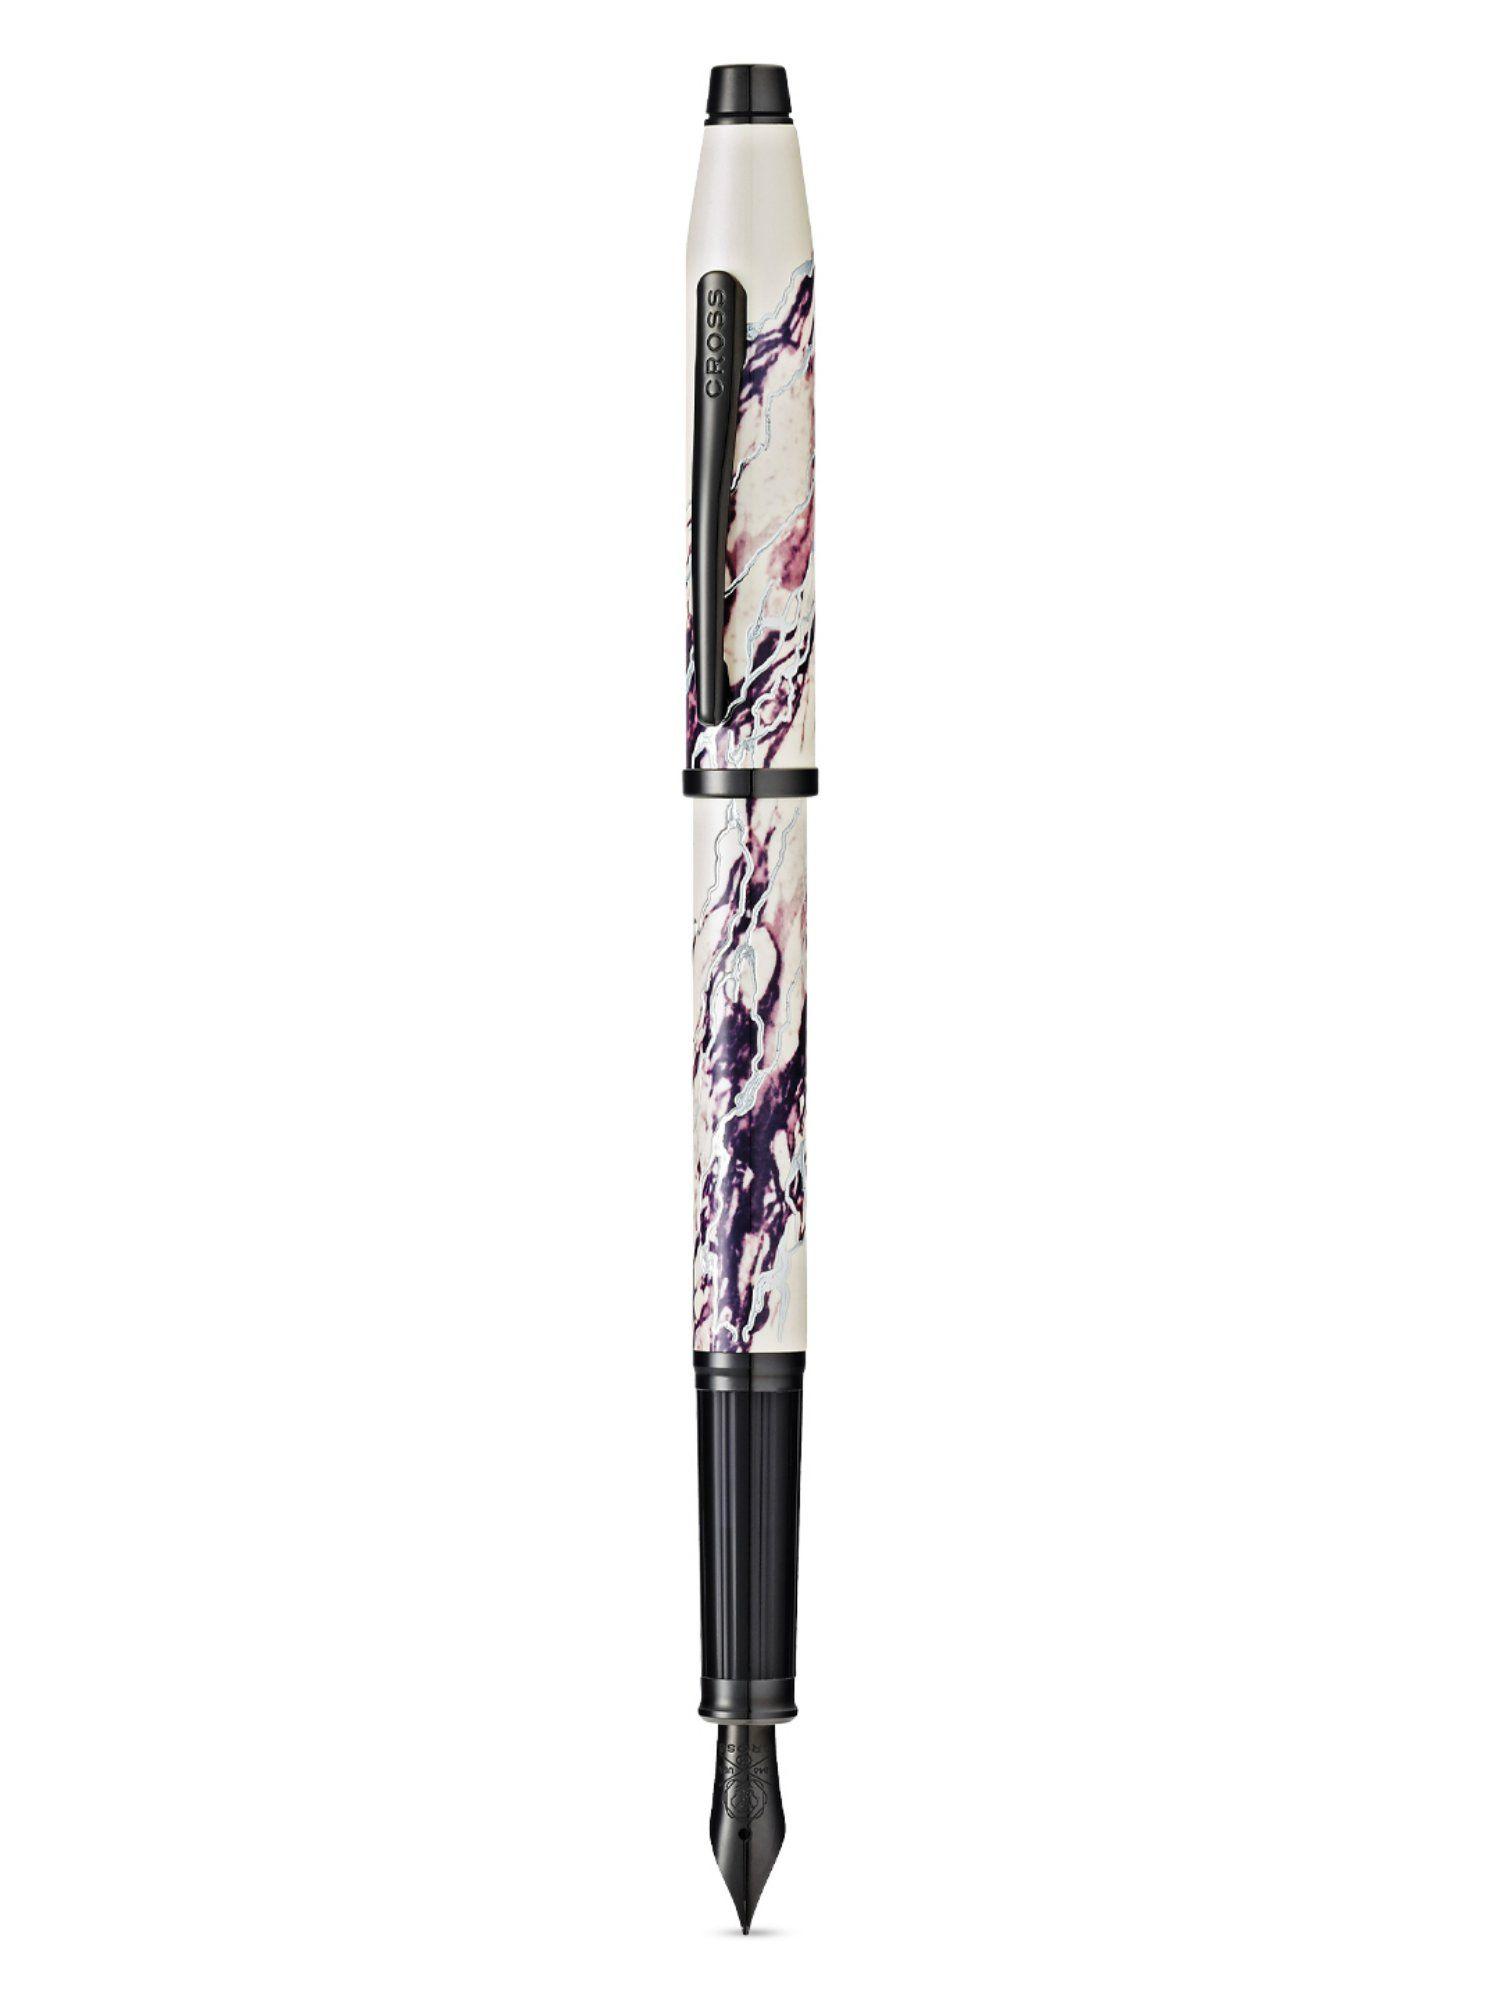 at0756-1mj wanderlust everest fountain pen w- black pvd coated med ni